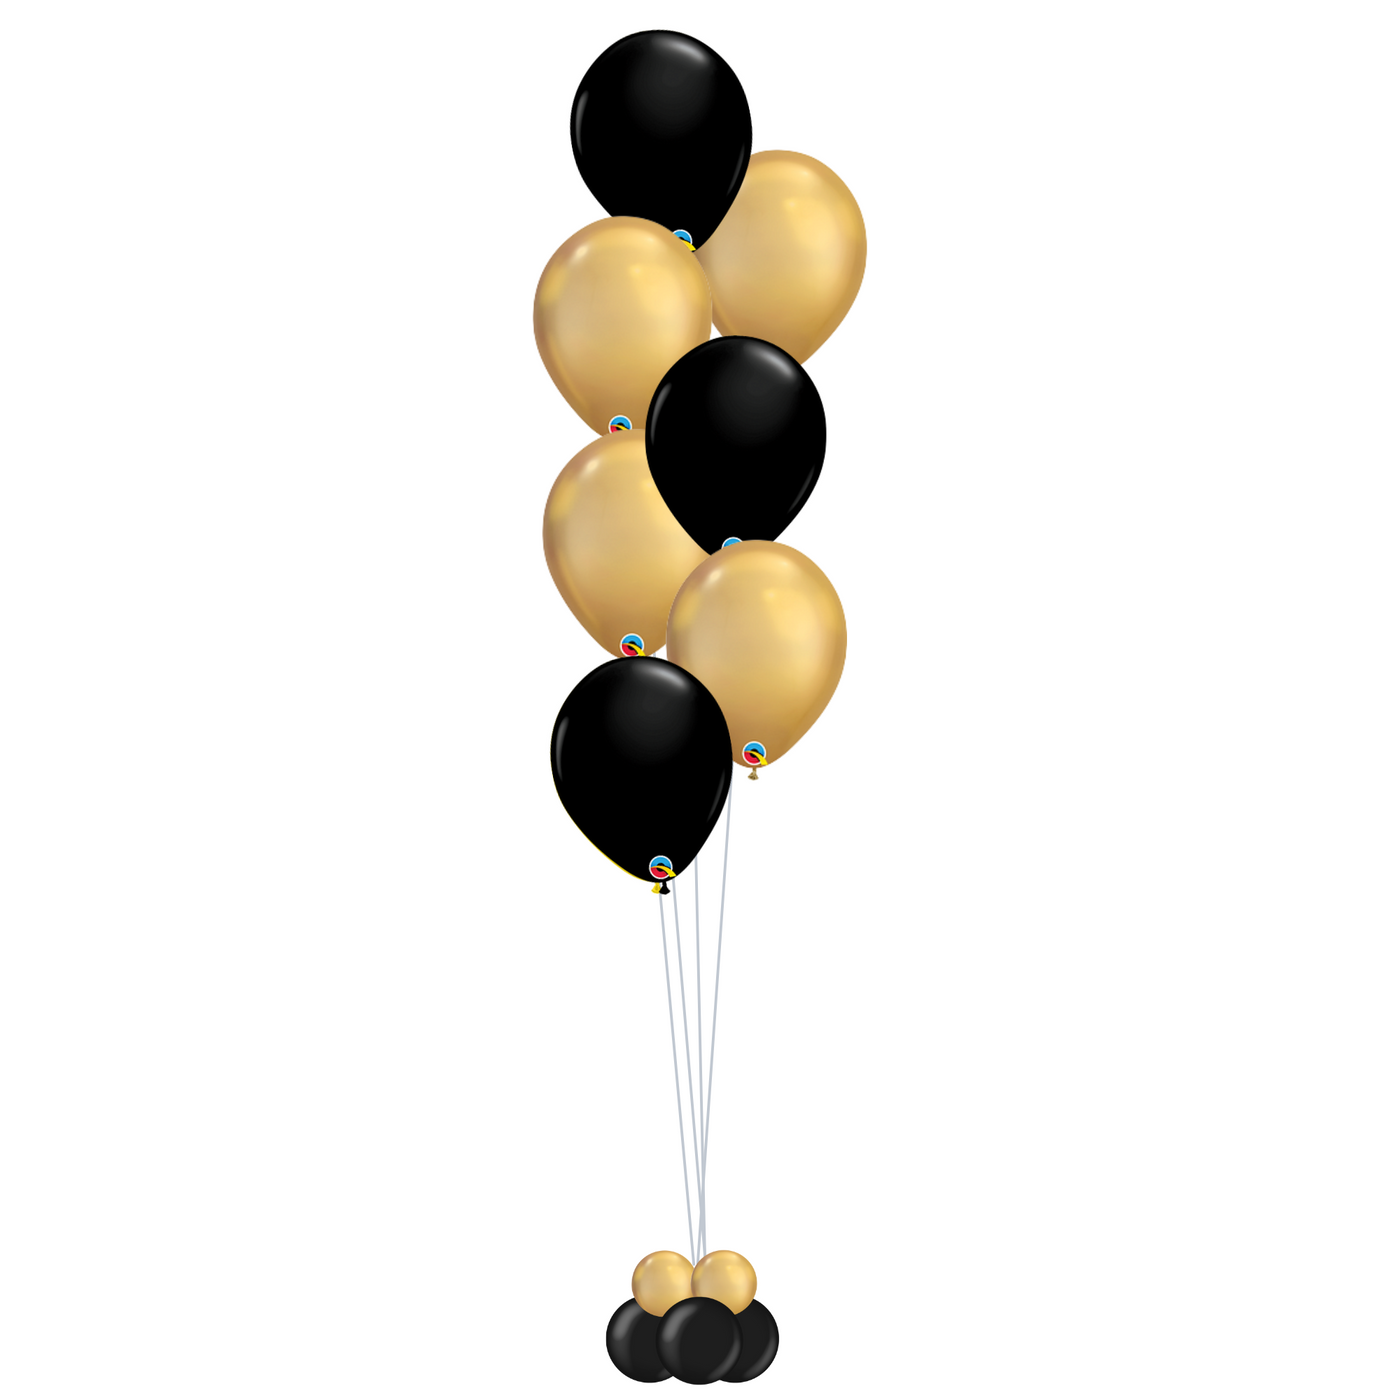 Black & Gold New Year's Eve Balloon Bouquet